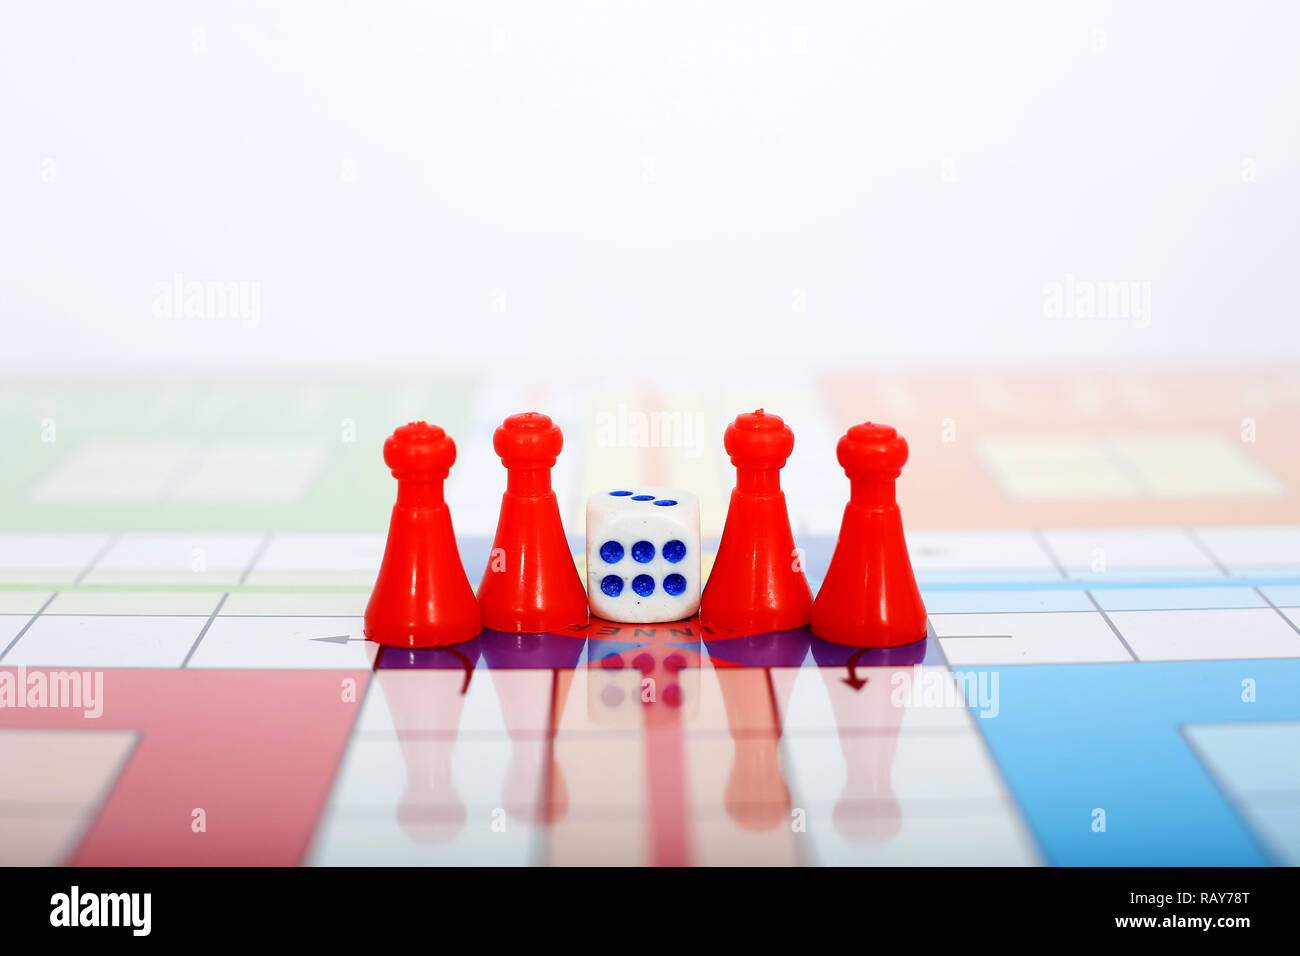 Portrait of red pawns with dice on the ludo game. Stock Photo